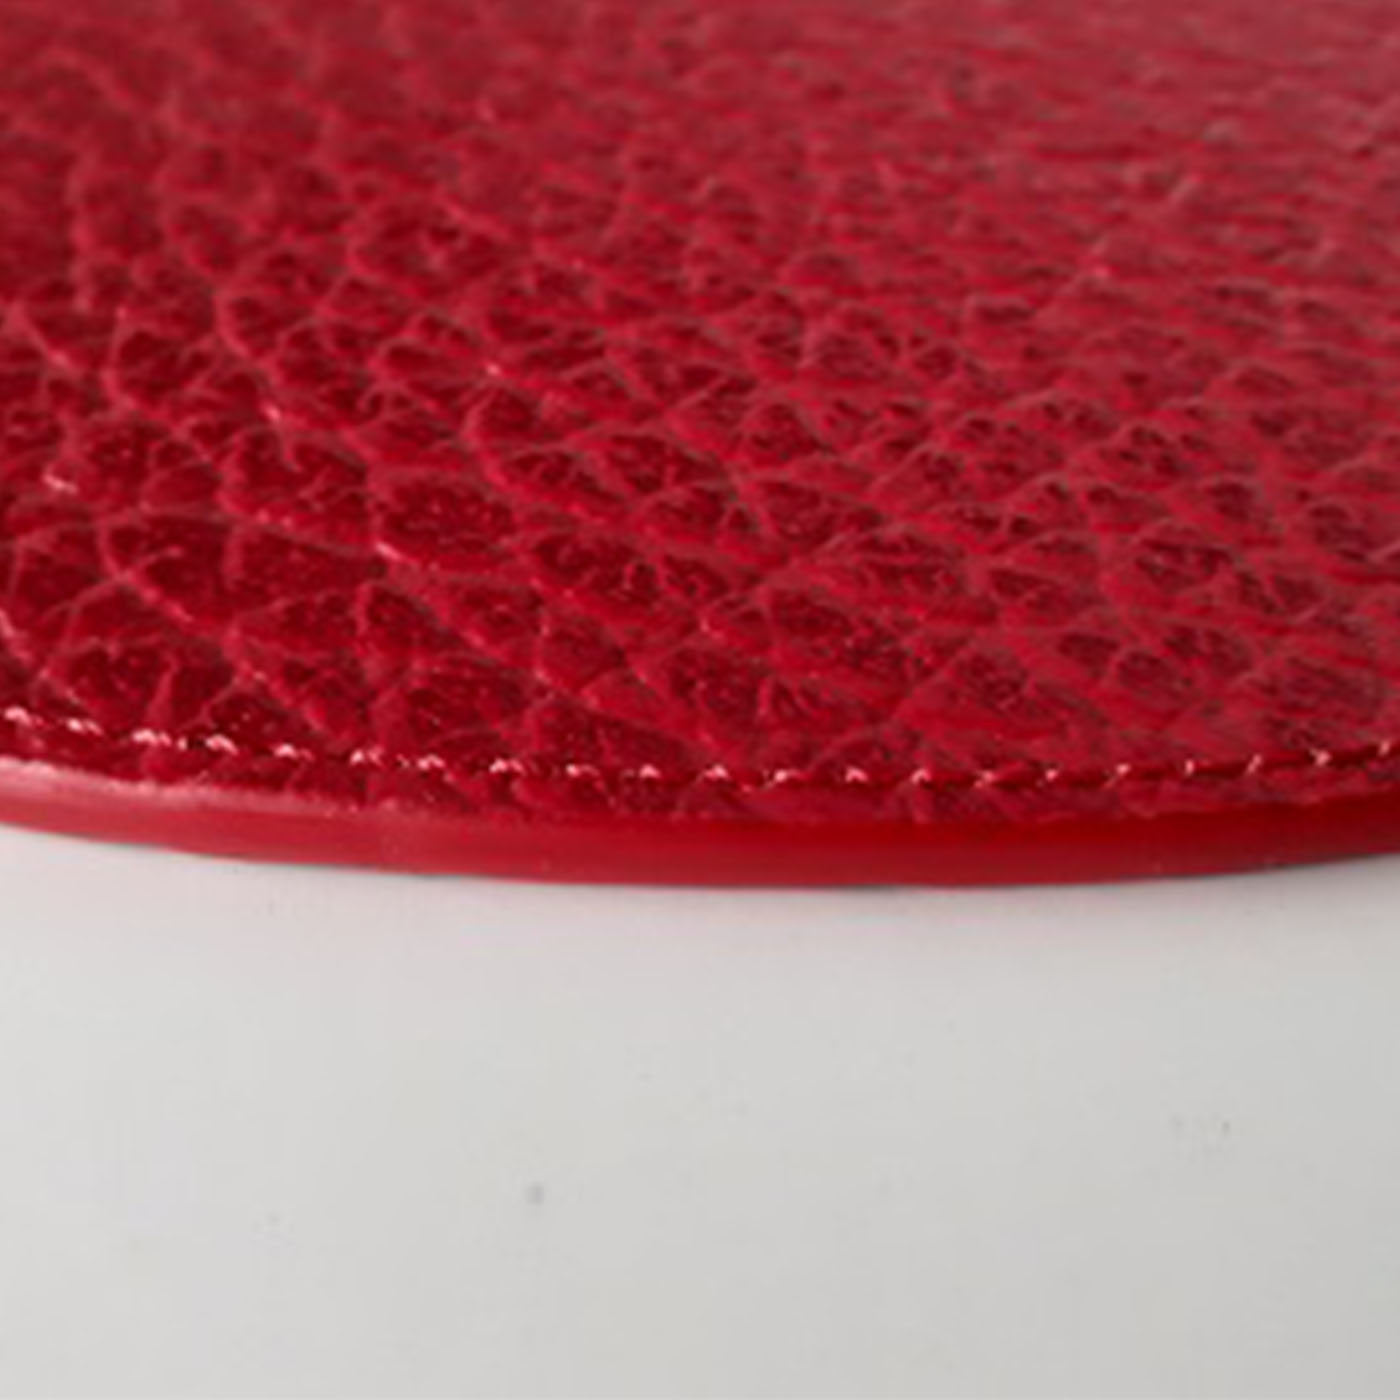 Tanzania Medium Set of 2 Red Leather Placemats - Alternative view 5